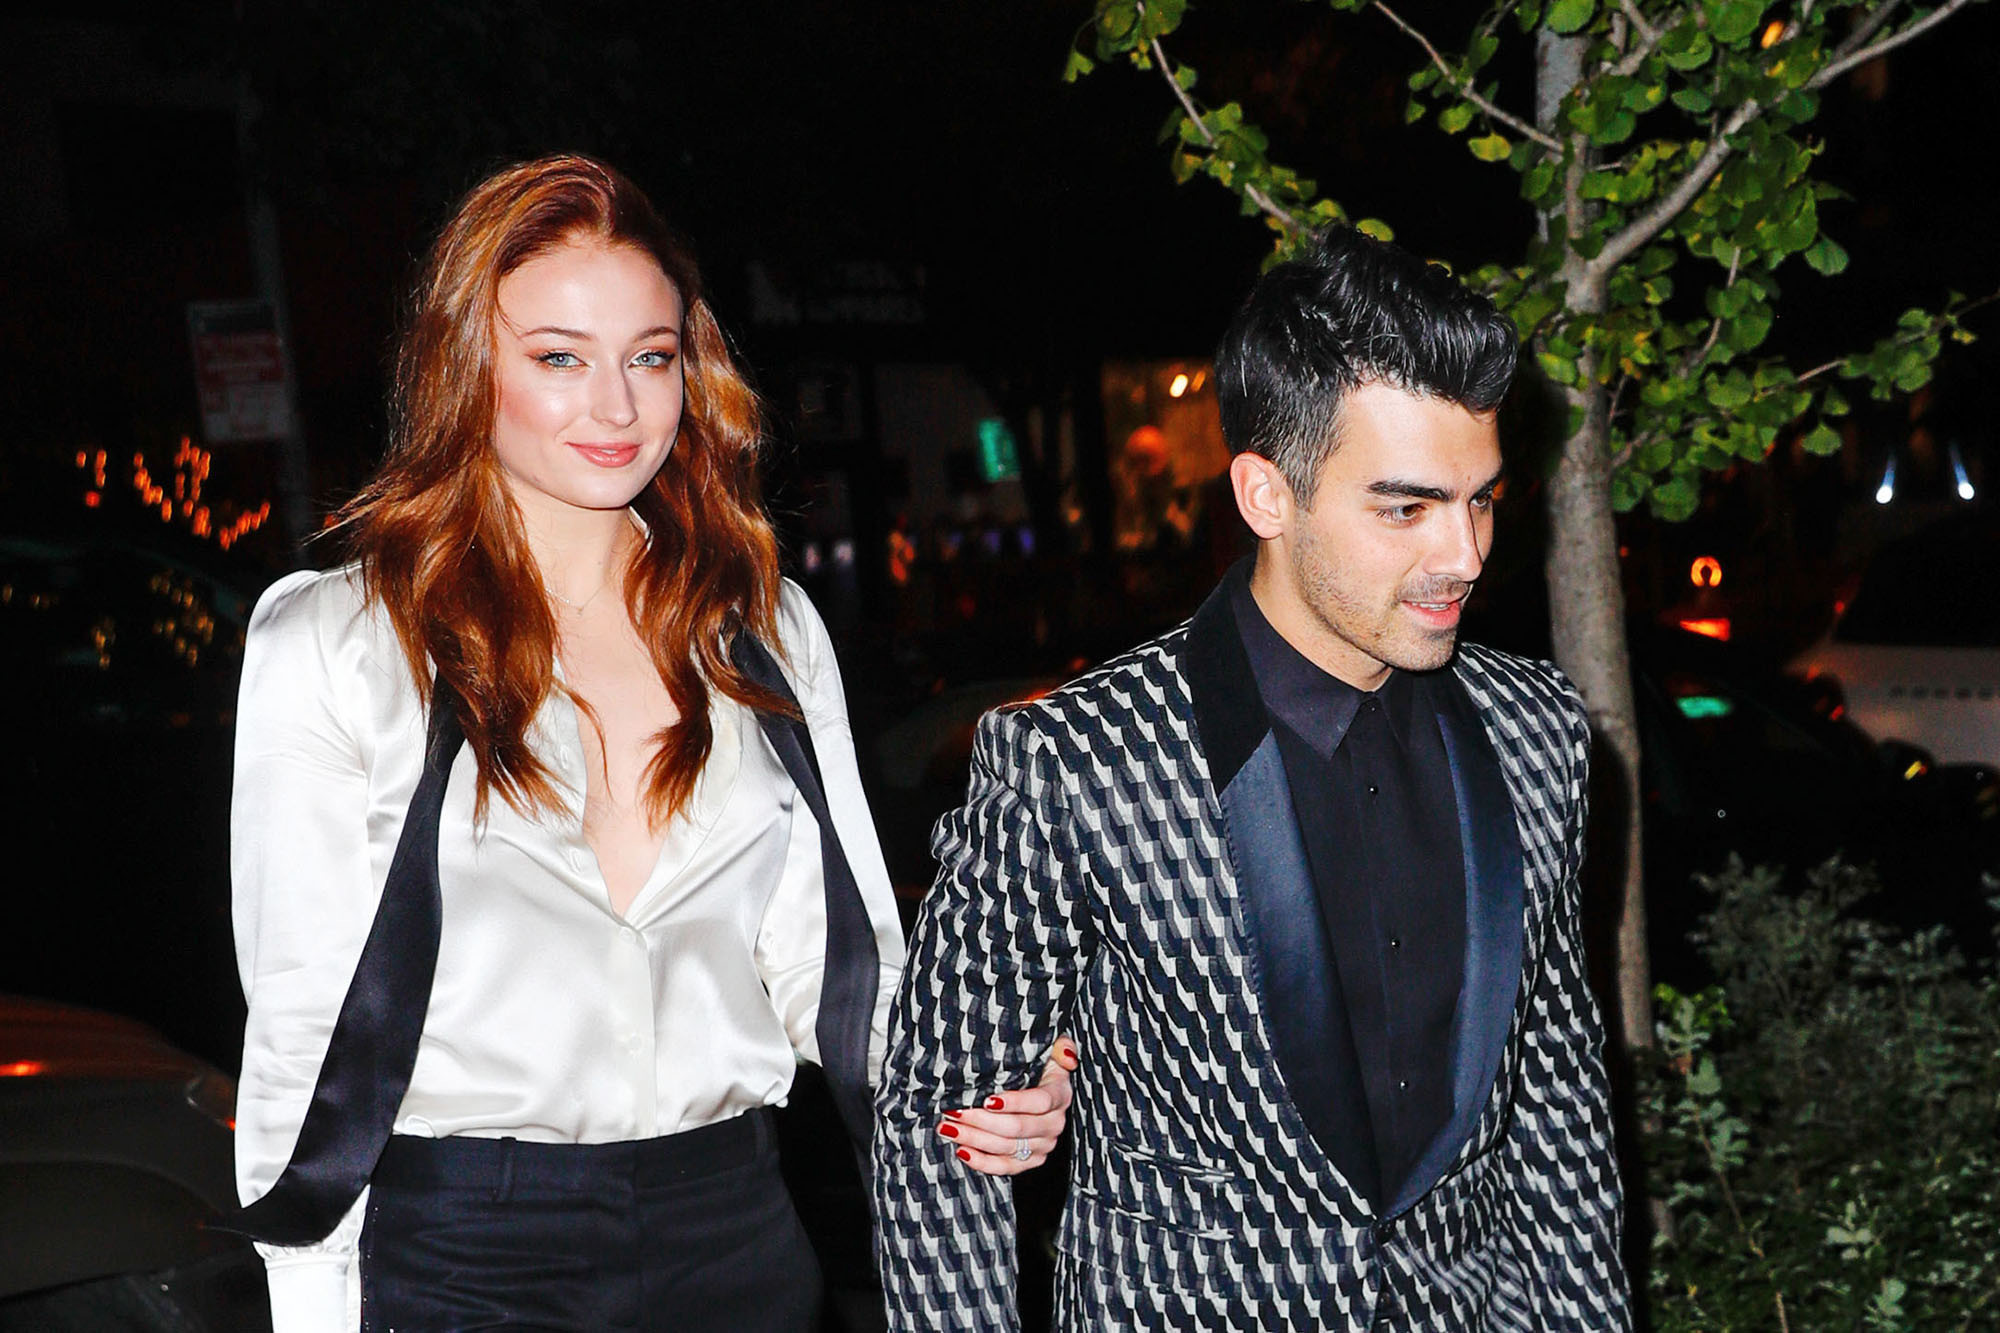 How Sophie Turner’s partying led Joe Jonas to file for divorce: report